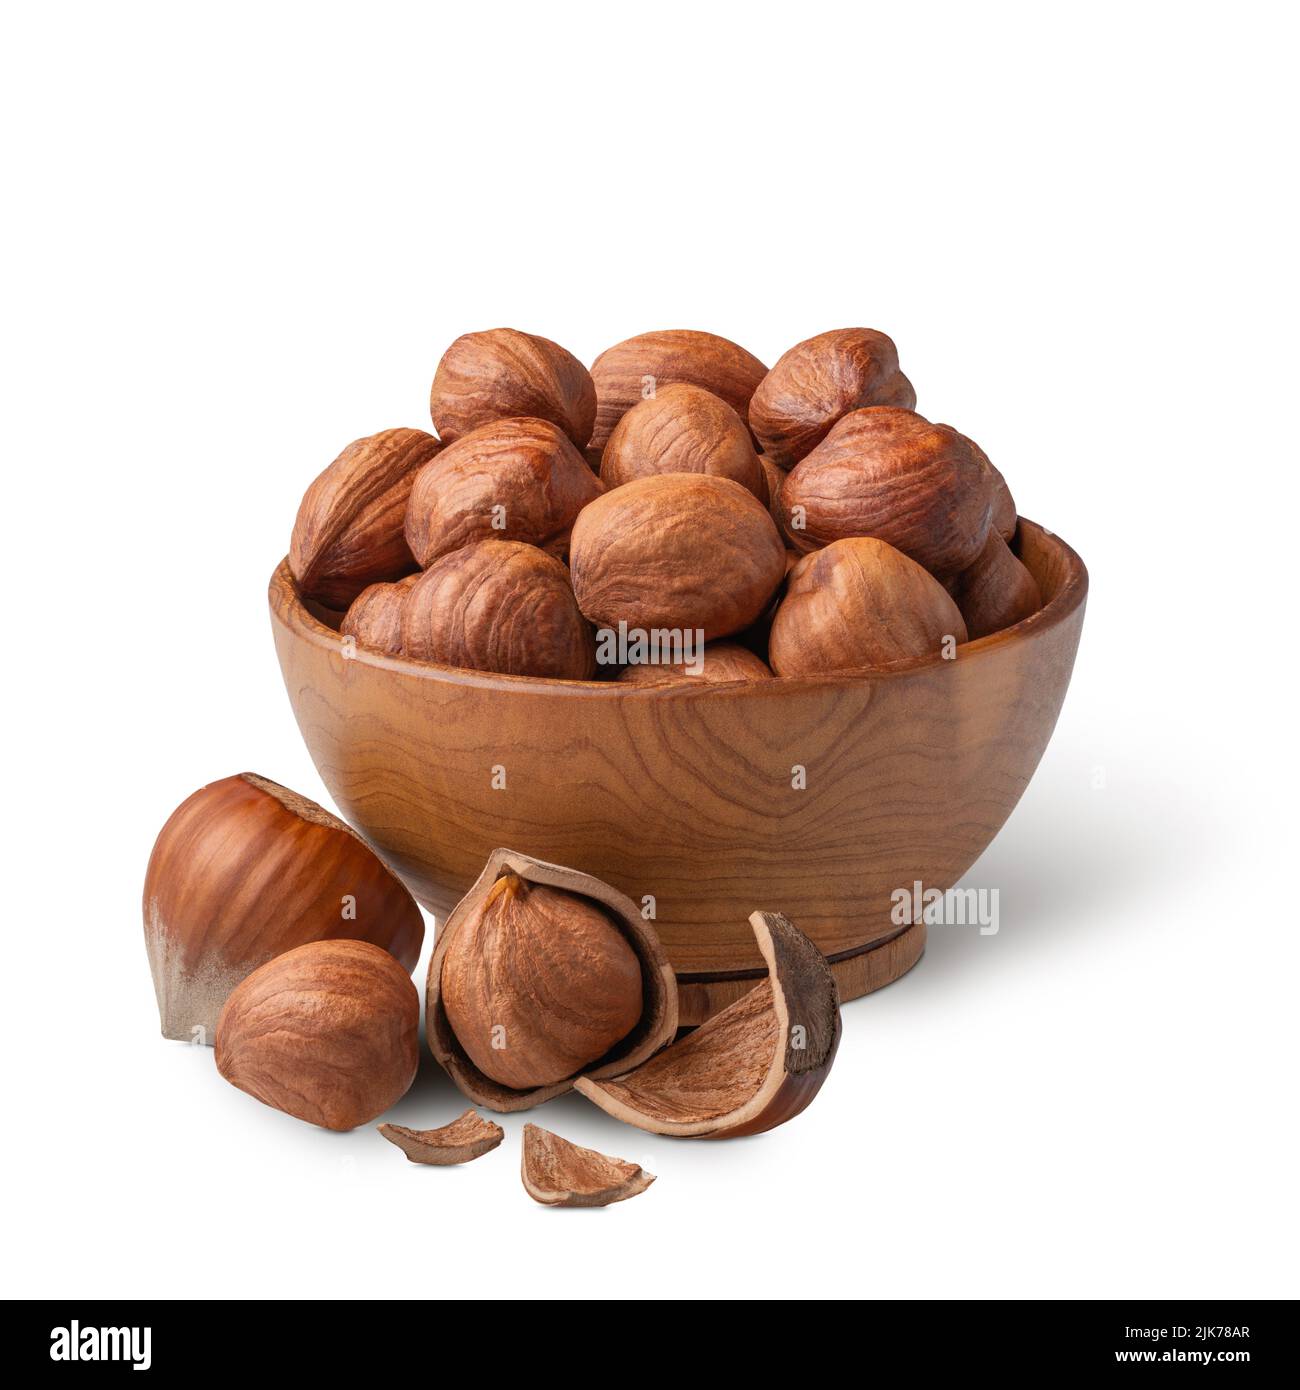 Bowl of hazelnuts with green leaves isolated on white. Deep focus Stock Photo